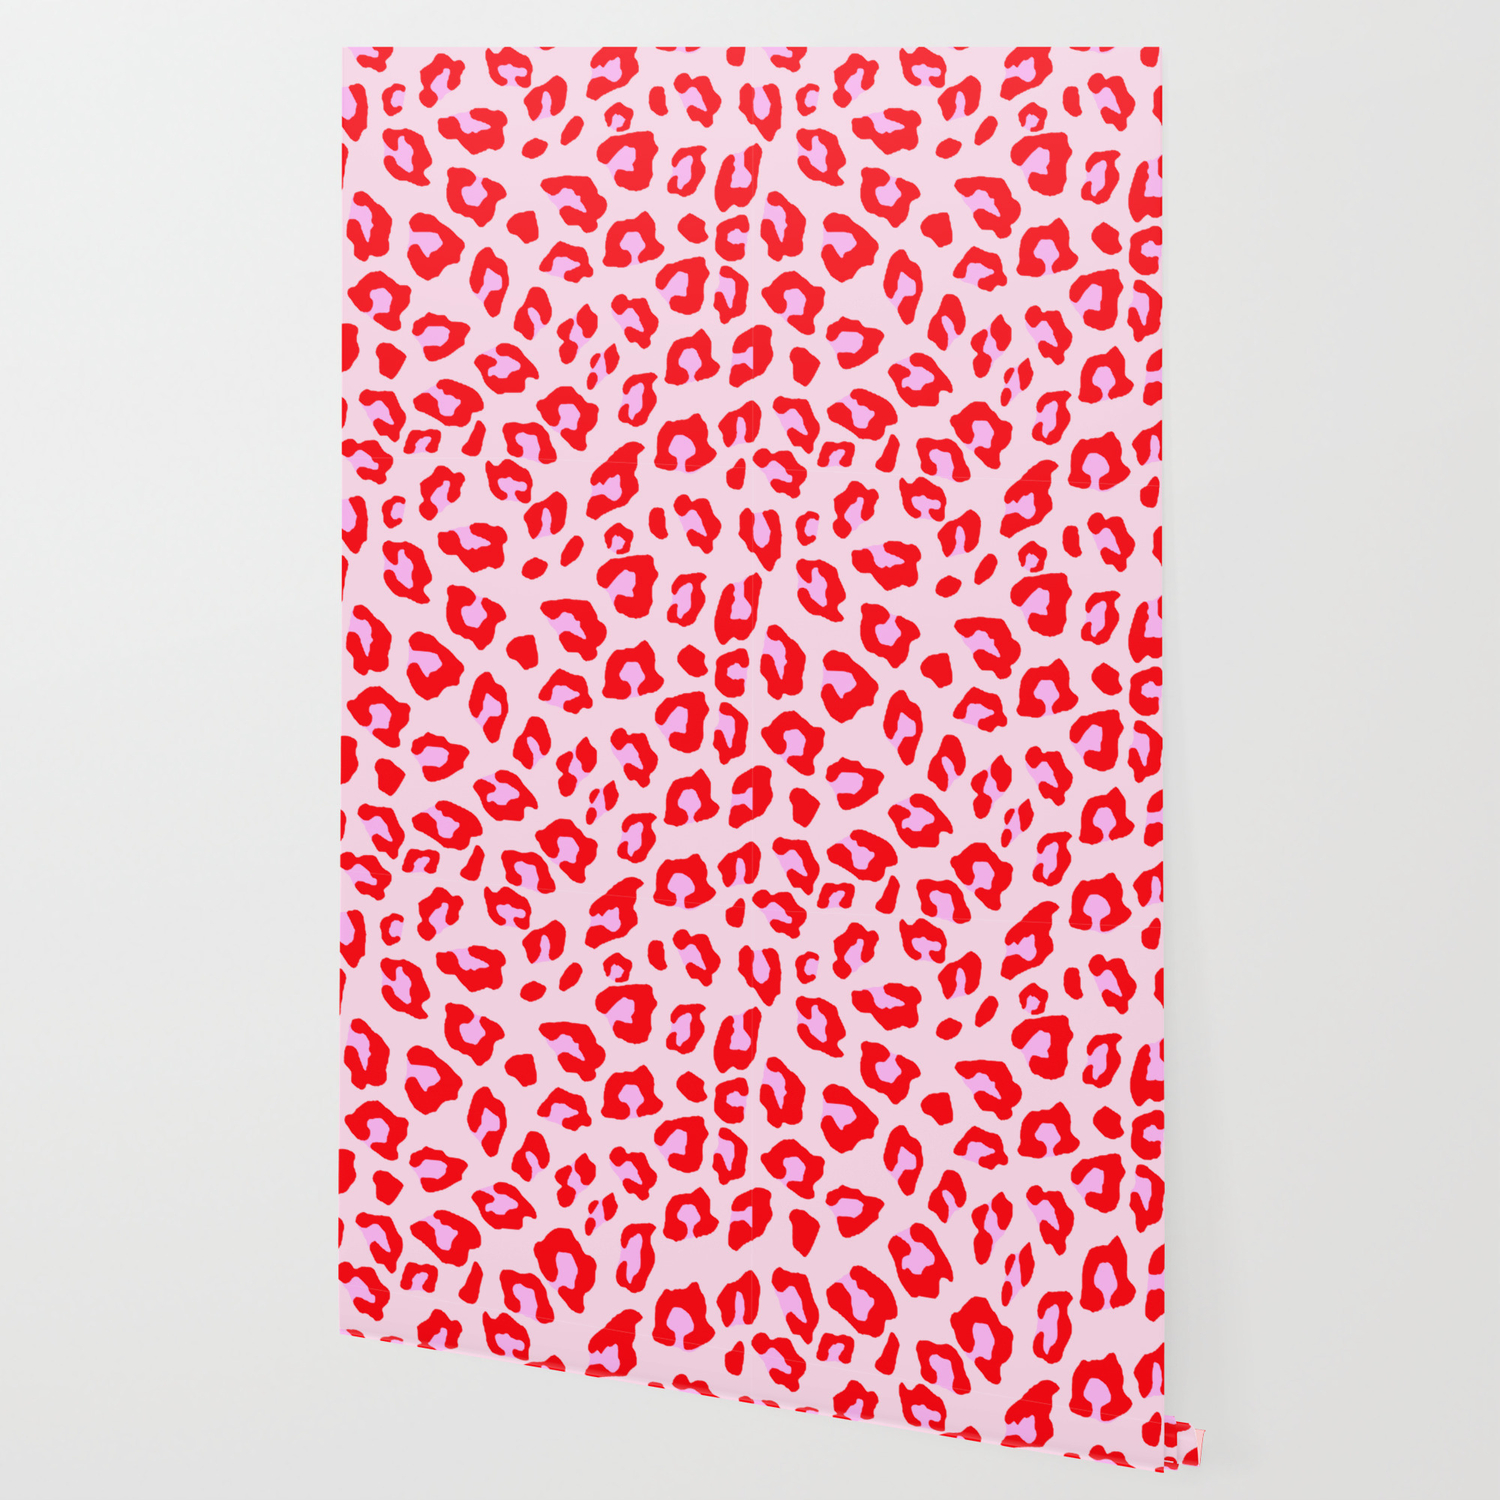 Leopard Print - Red And Pink Original Wallpaper by SilverPegasus | Society6